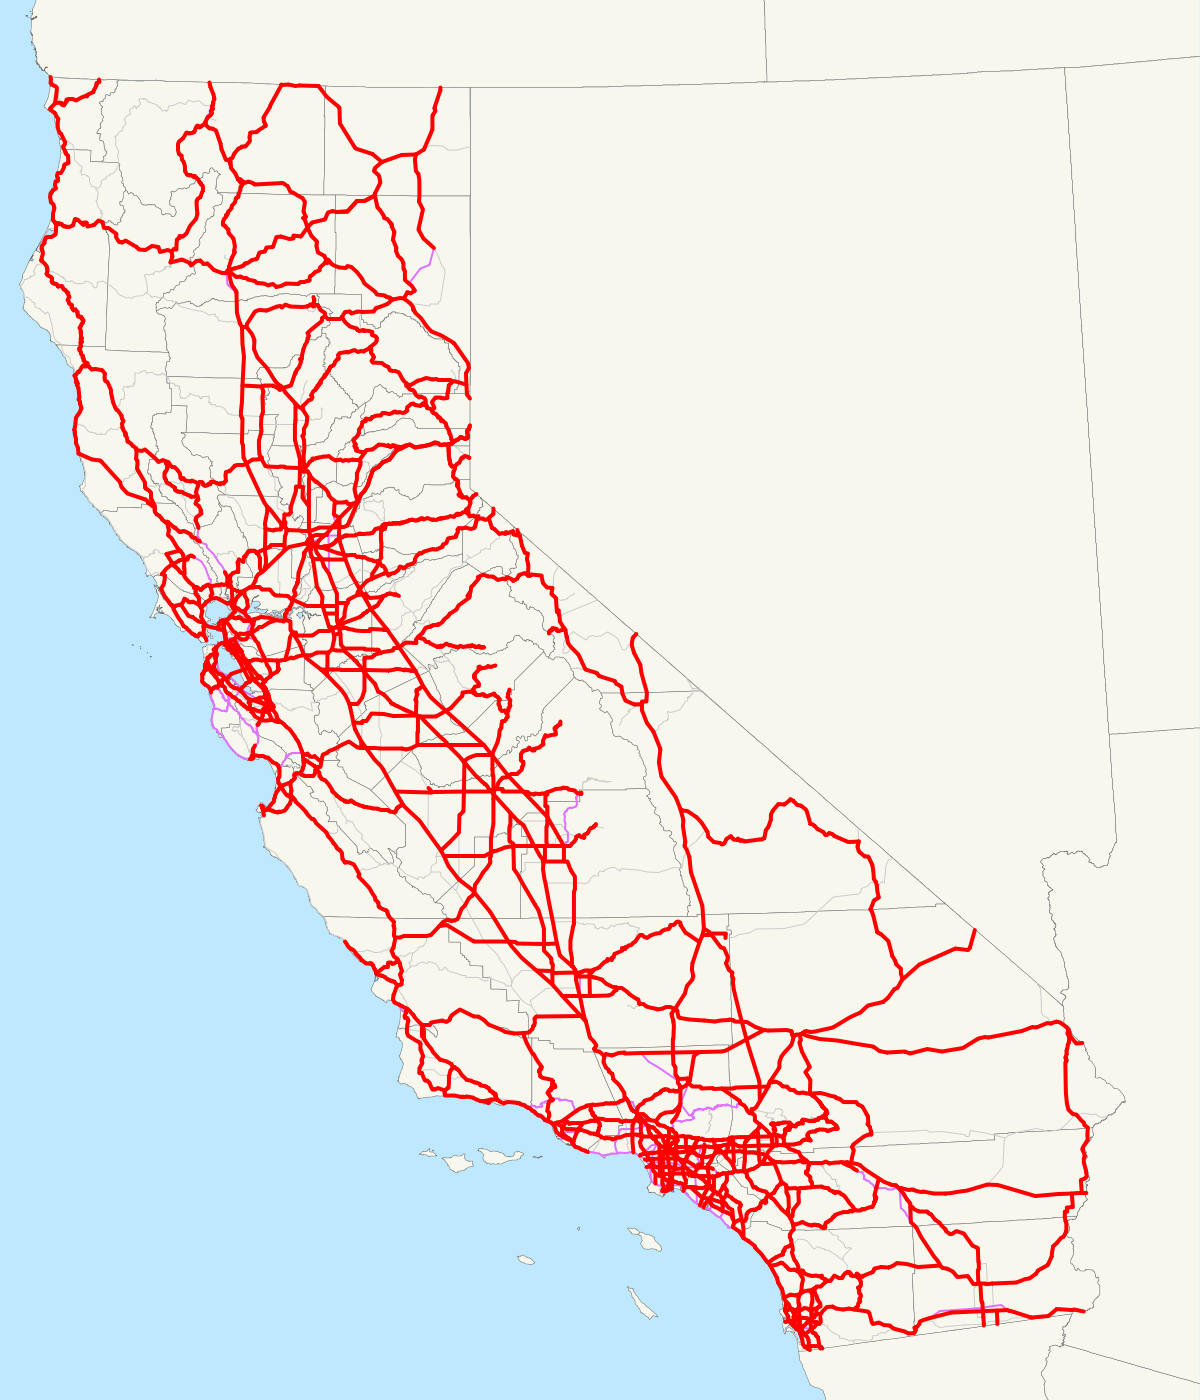 California Freeway And Expressway System - Wikipedia - Map Of Southern California Freeway System